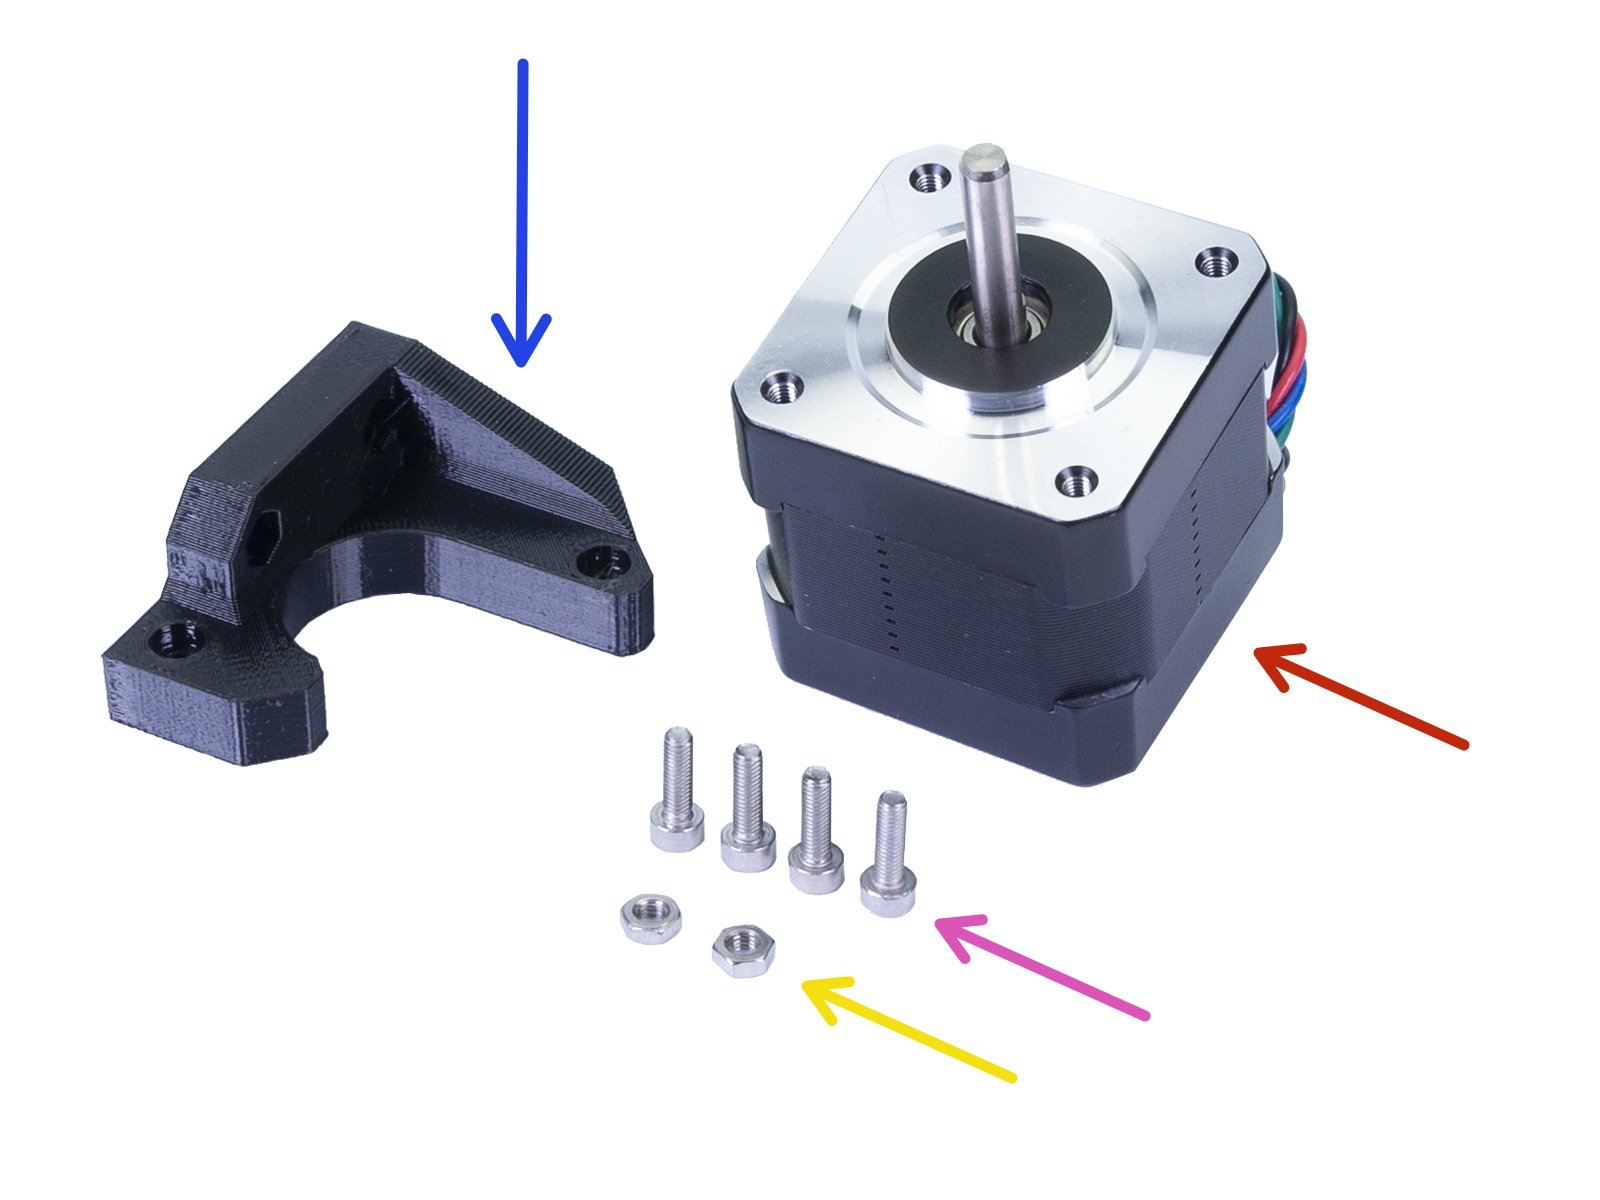 Y-axis: motor and motor holder